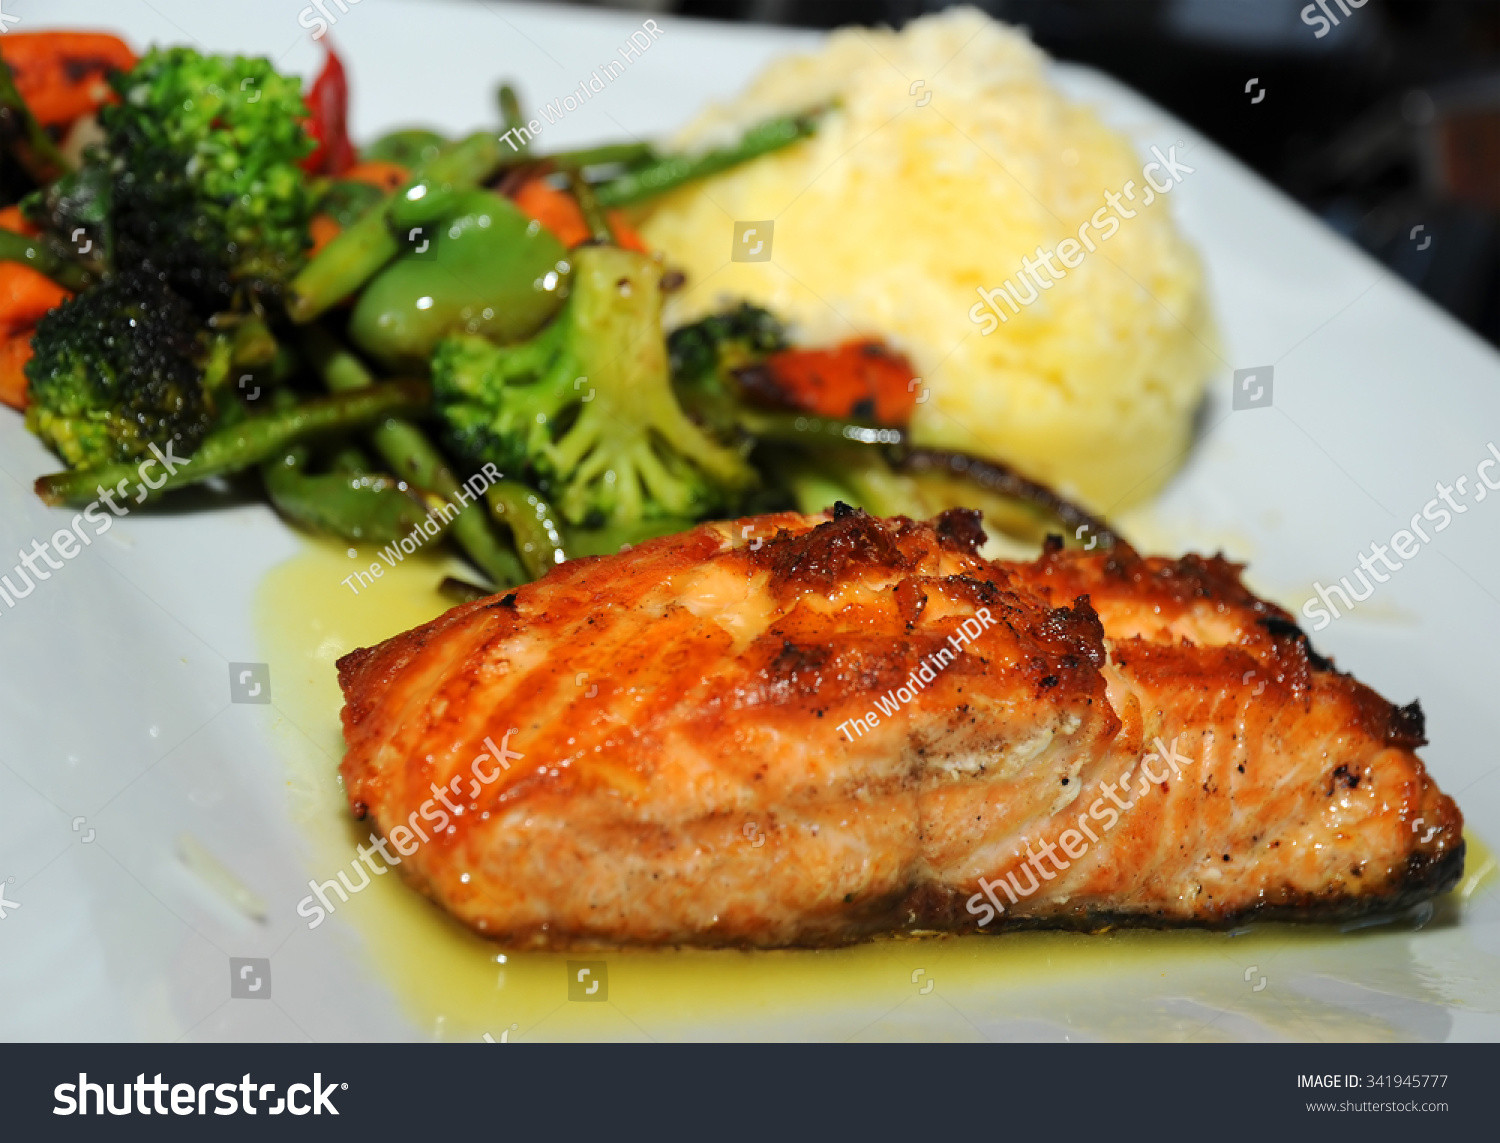 Salmon And Mashed Potatoes
 Grilled Salmon With Cooked Ve ables And Mashed Potatoes